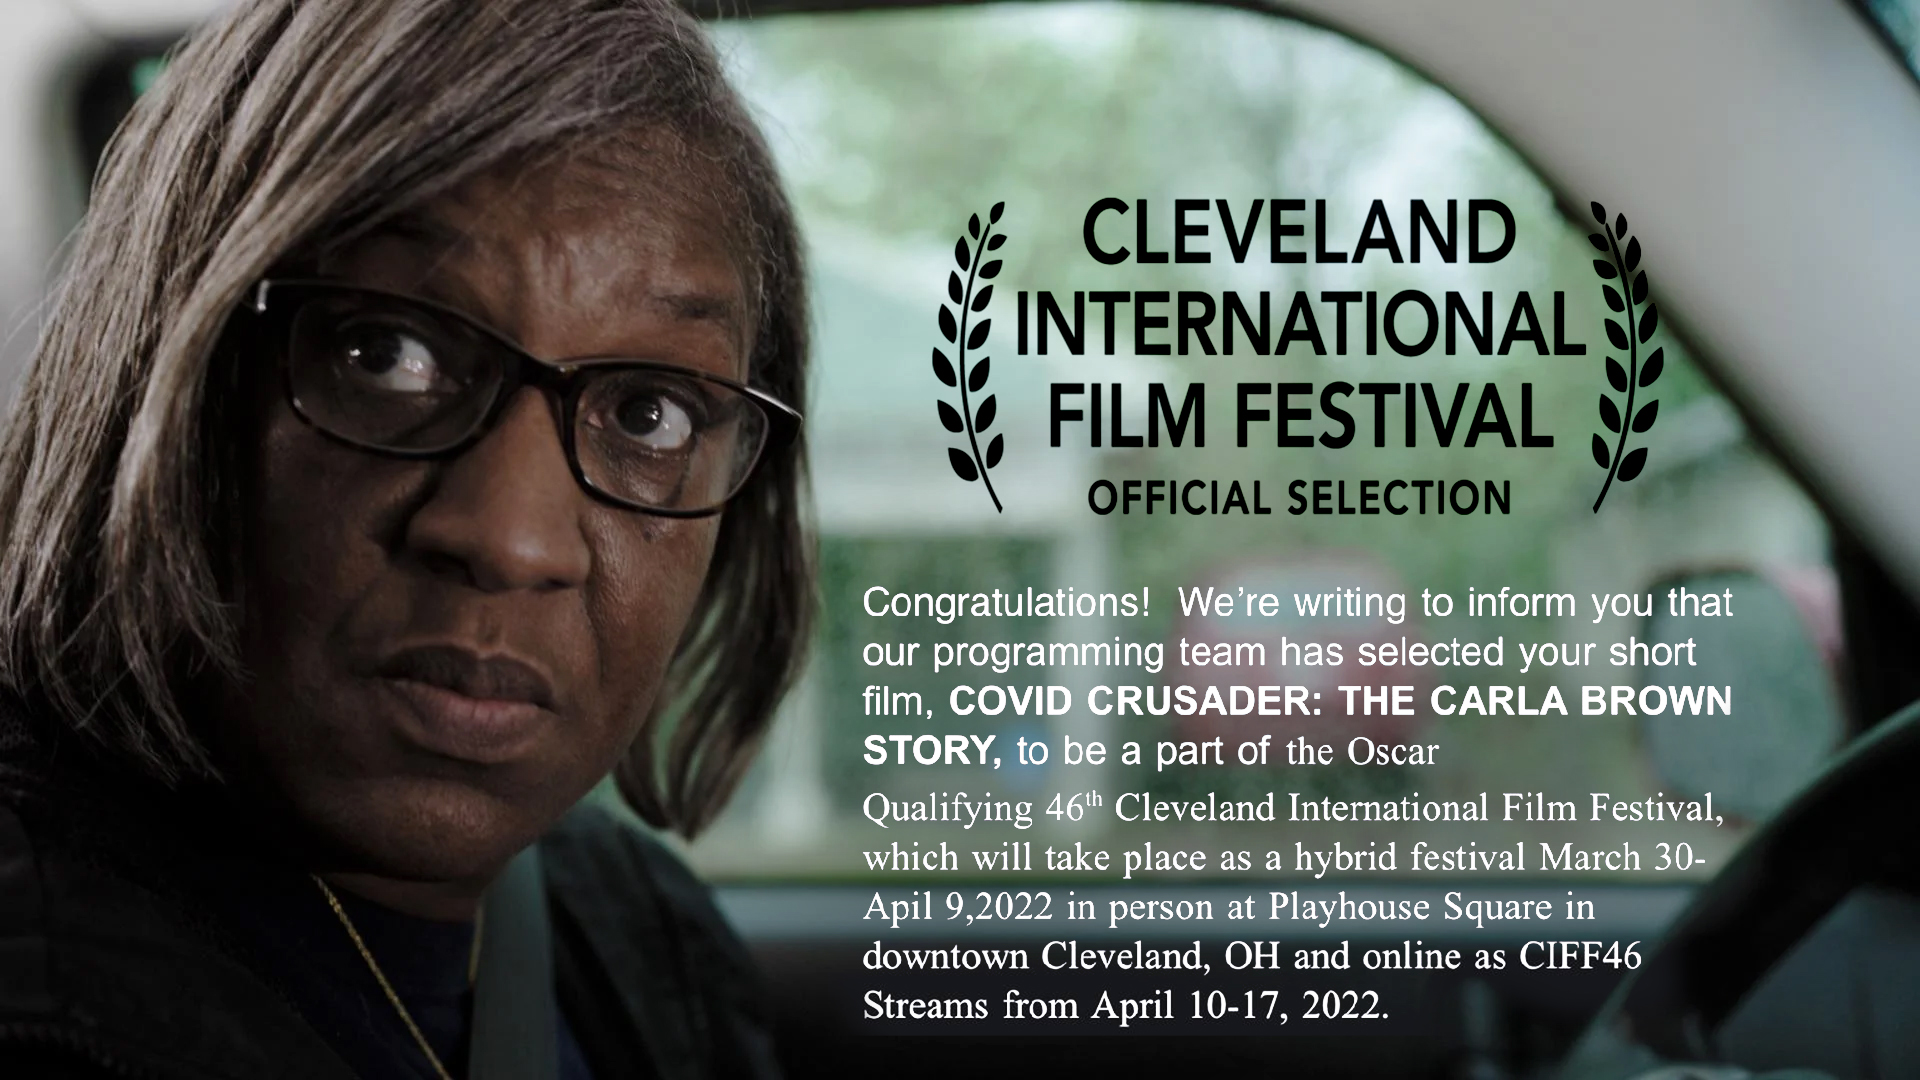 Cleveland International Film Festival Official Selection Cleveland International Film Festival Official Selection - Covid Crusader: The Carla Brown Story by Randy Slavin